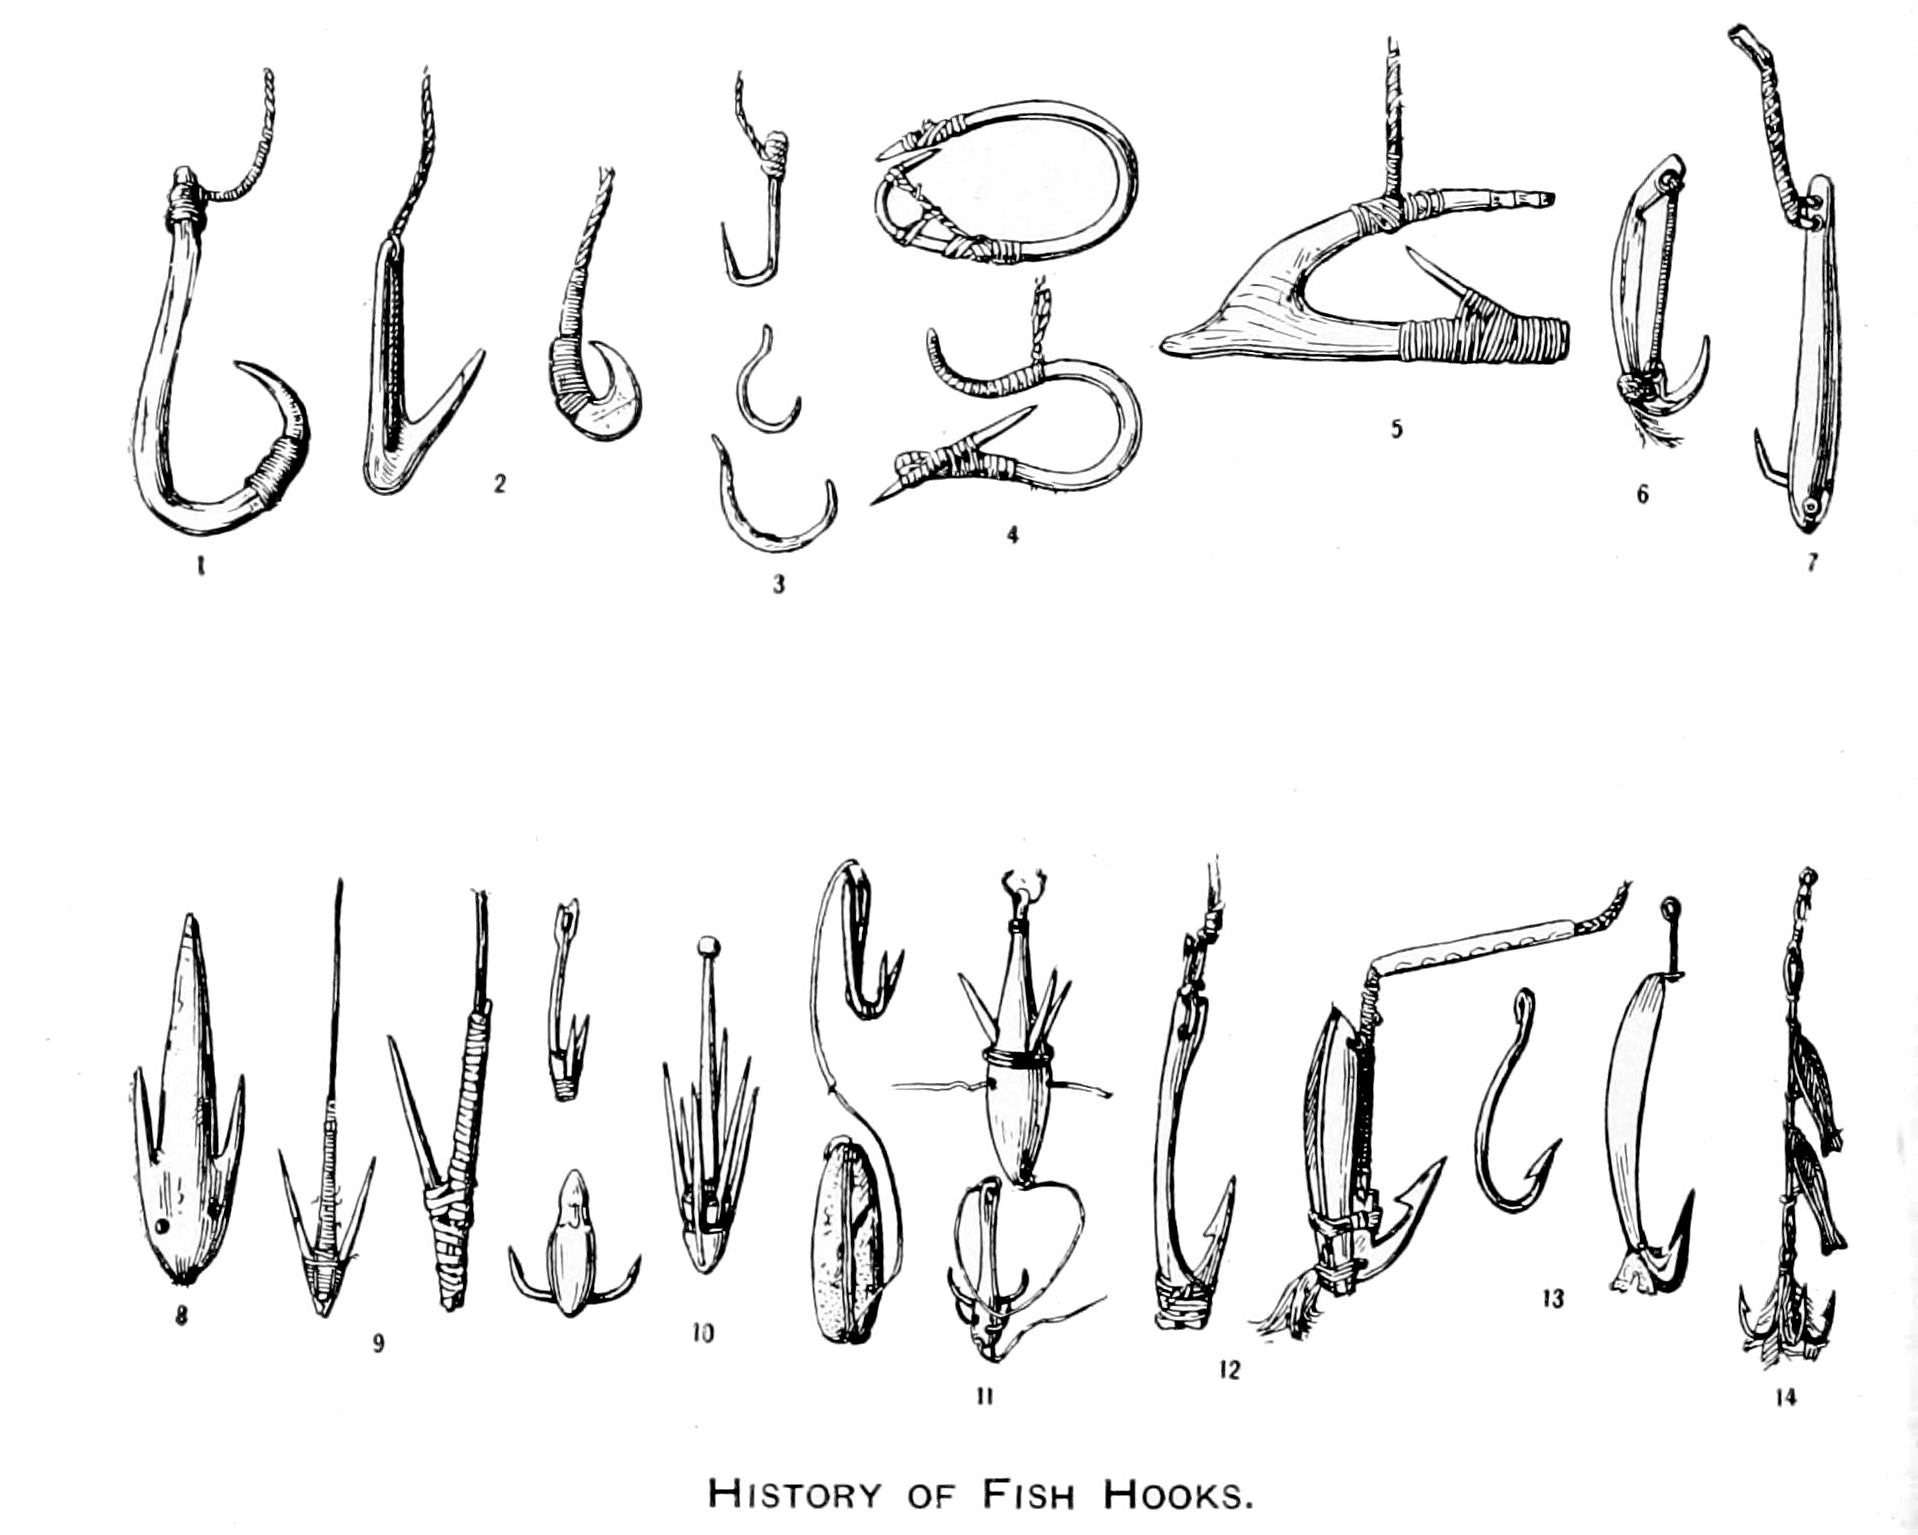 History_of_Inventions_USNM_26_Fish_Hooks.png